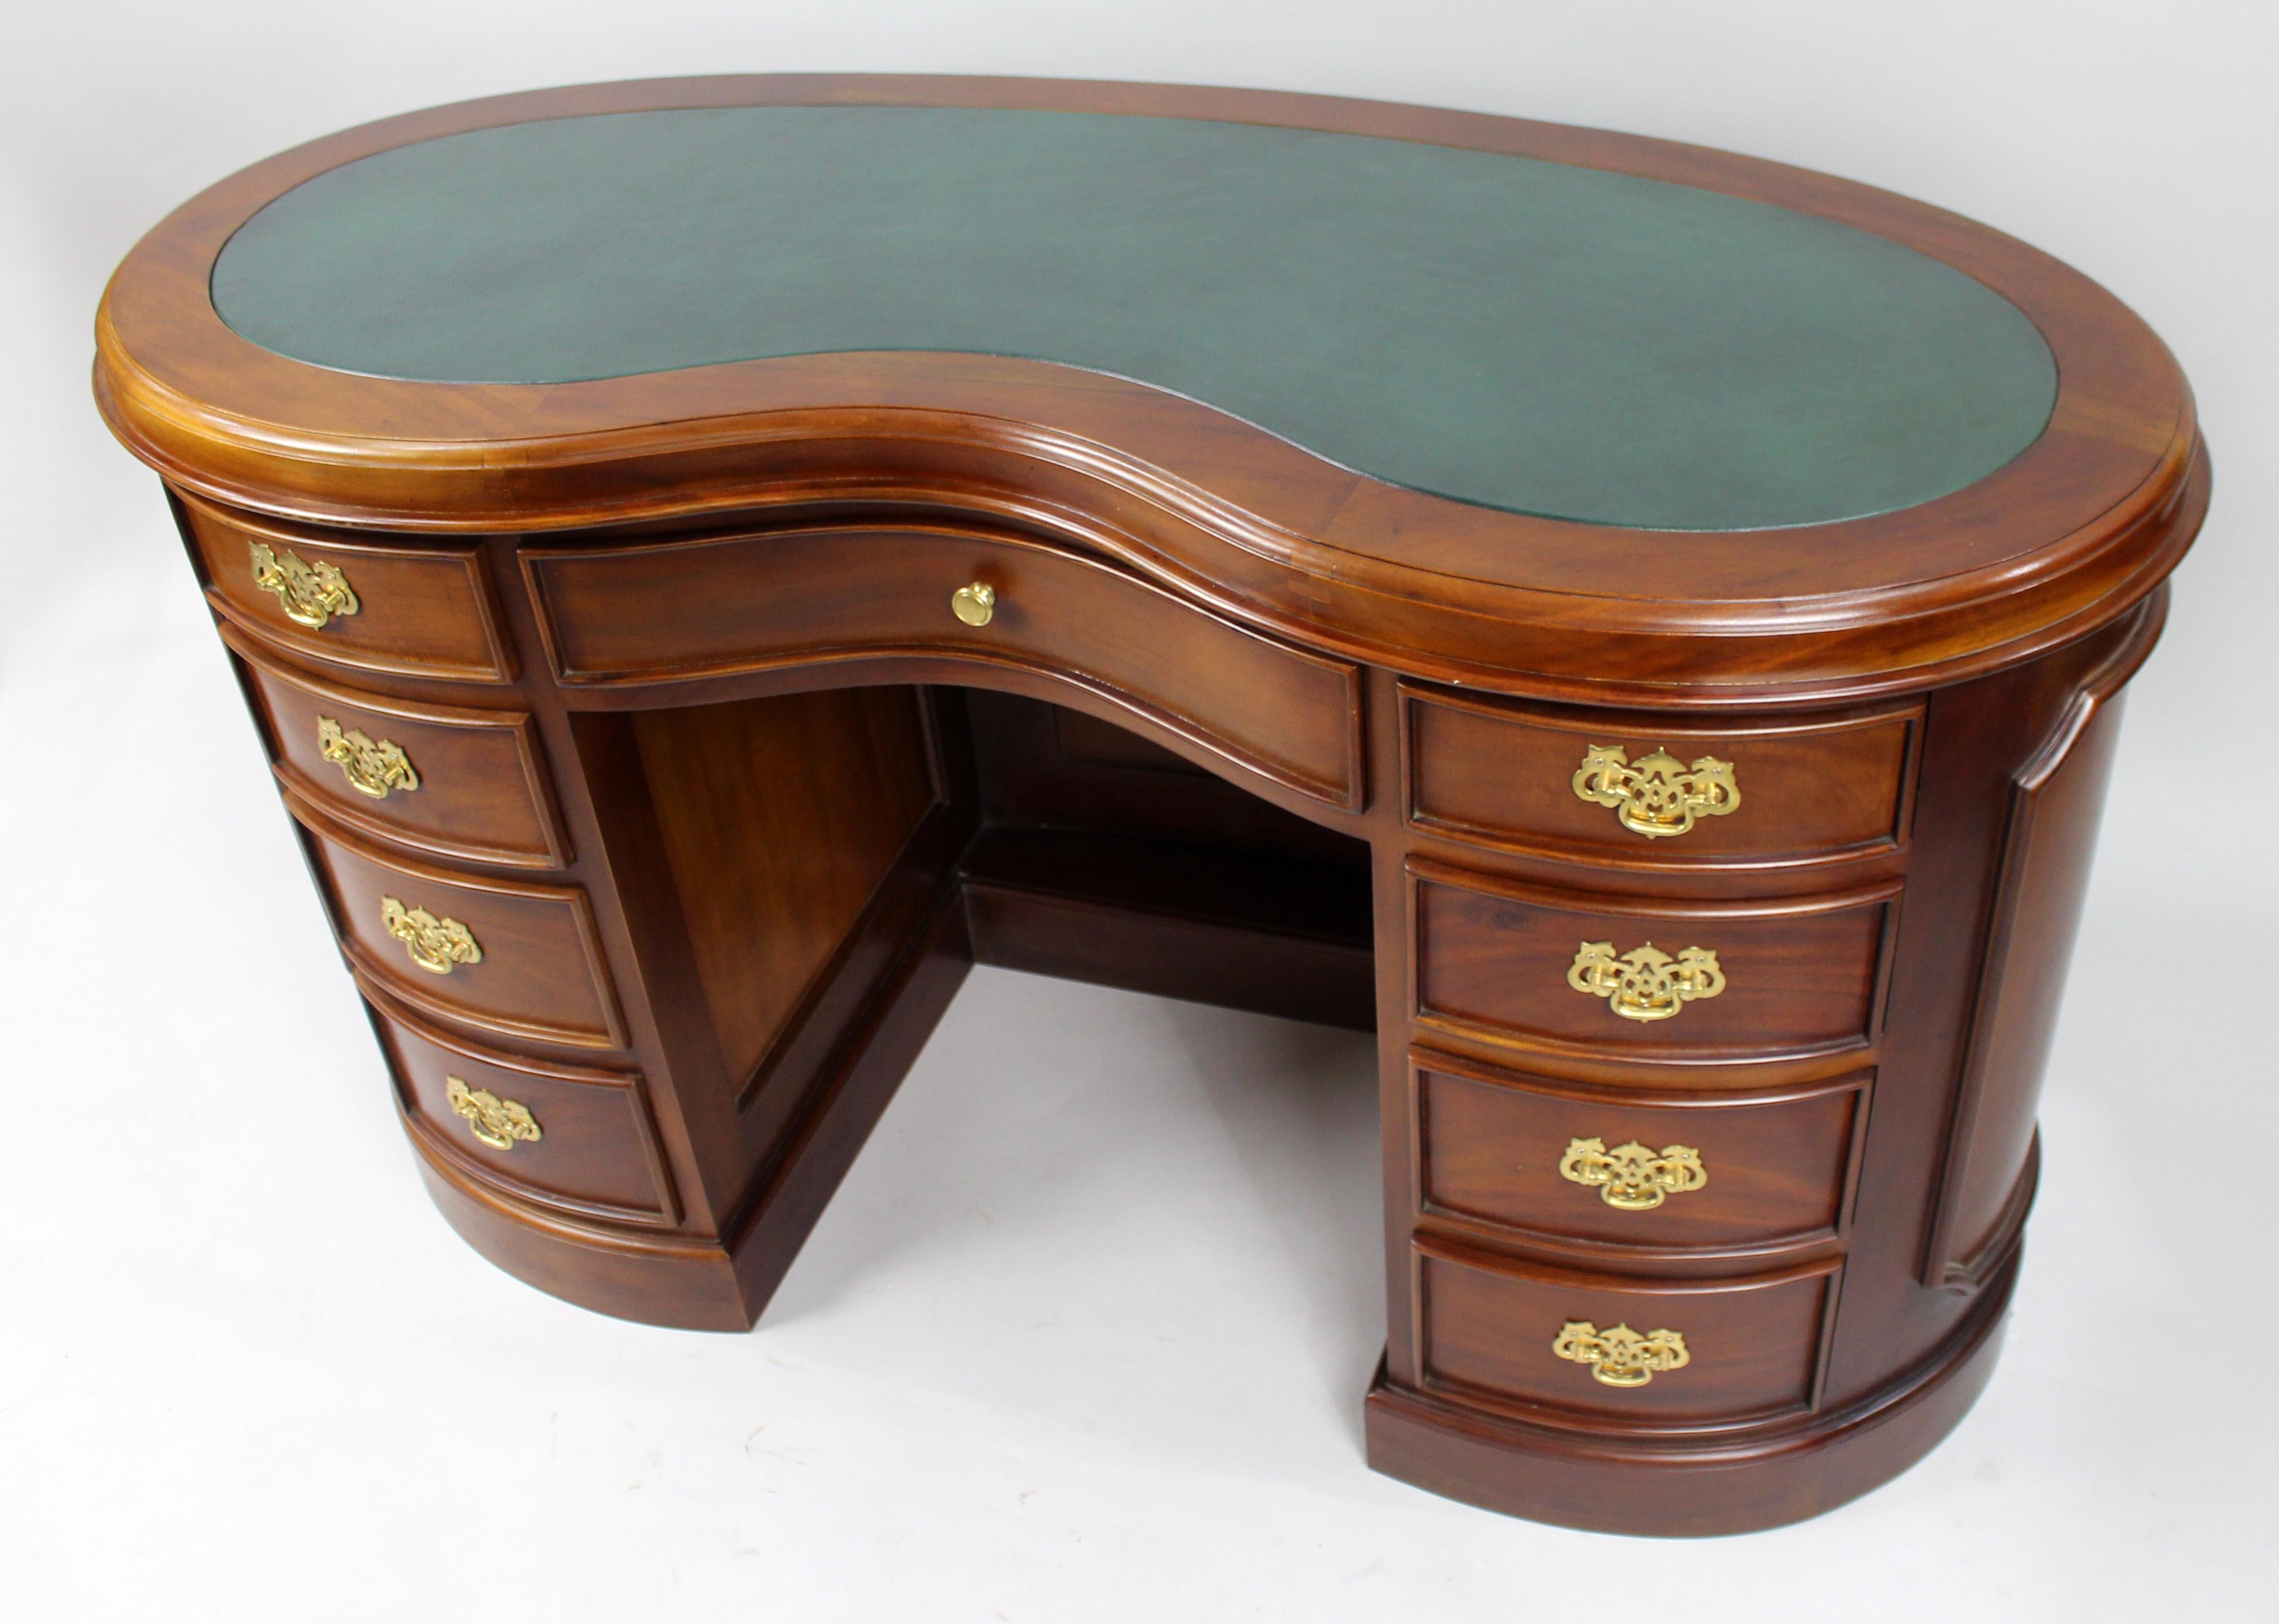 Kidney Shaped Mahogany Leather Topped Desk


We are pleased to offer a lovely quality hand crafted solid mahogany desk.

Kidney shaped with green inset leather top. Rich mahogany body with four drawers to either side of the kneehole and a